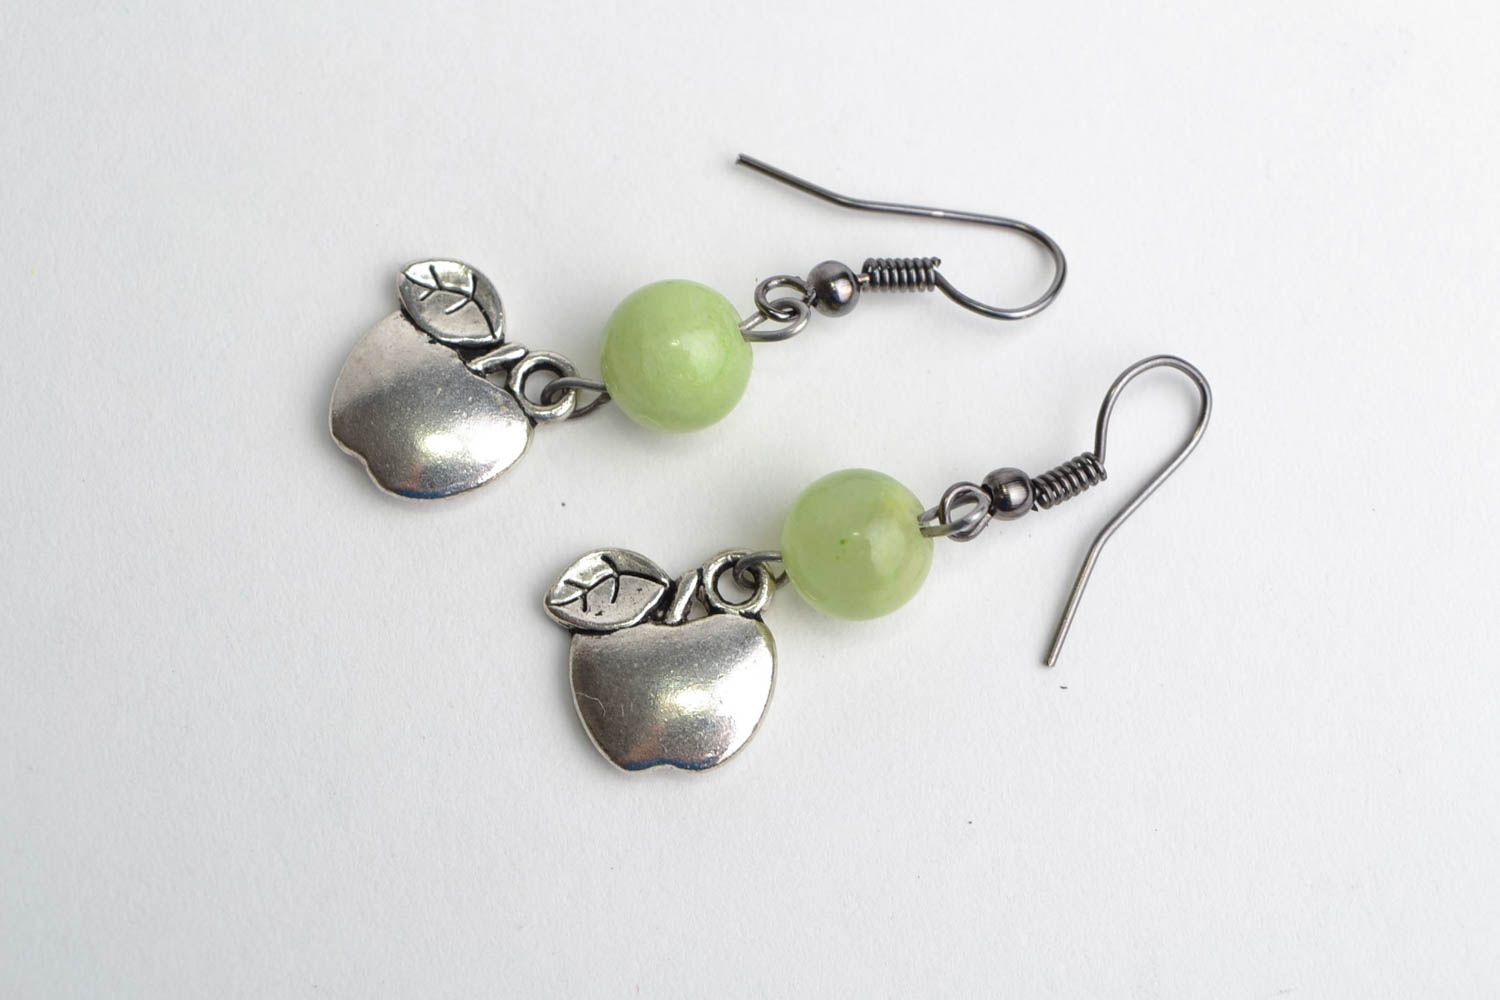 Handmade designer dangling earrings with natural agate and metal charms Apples photo 1